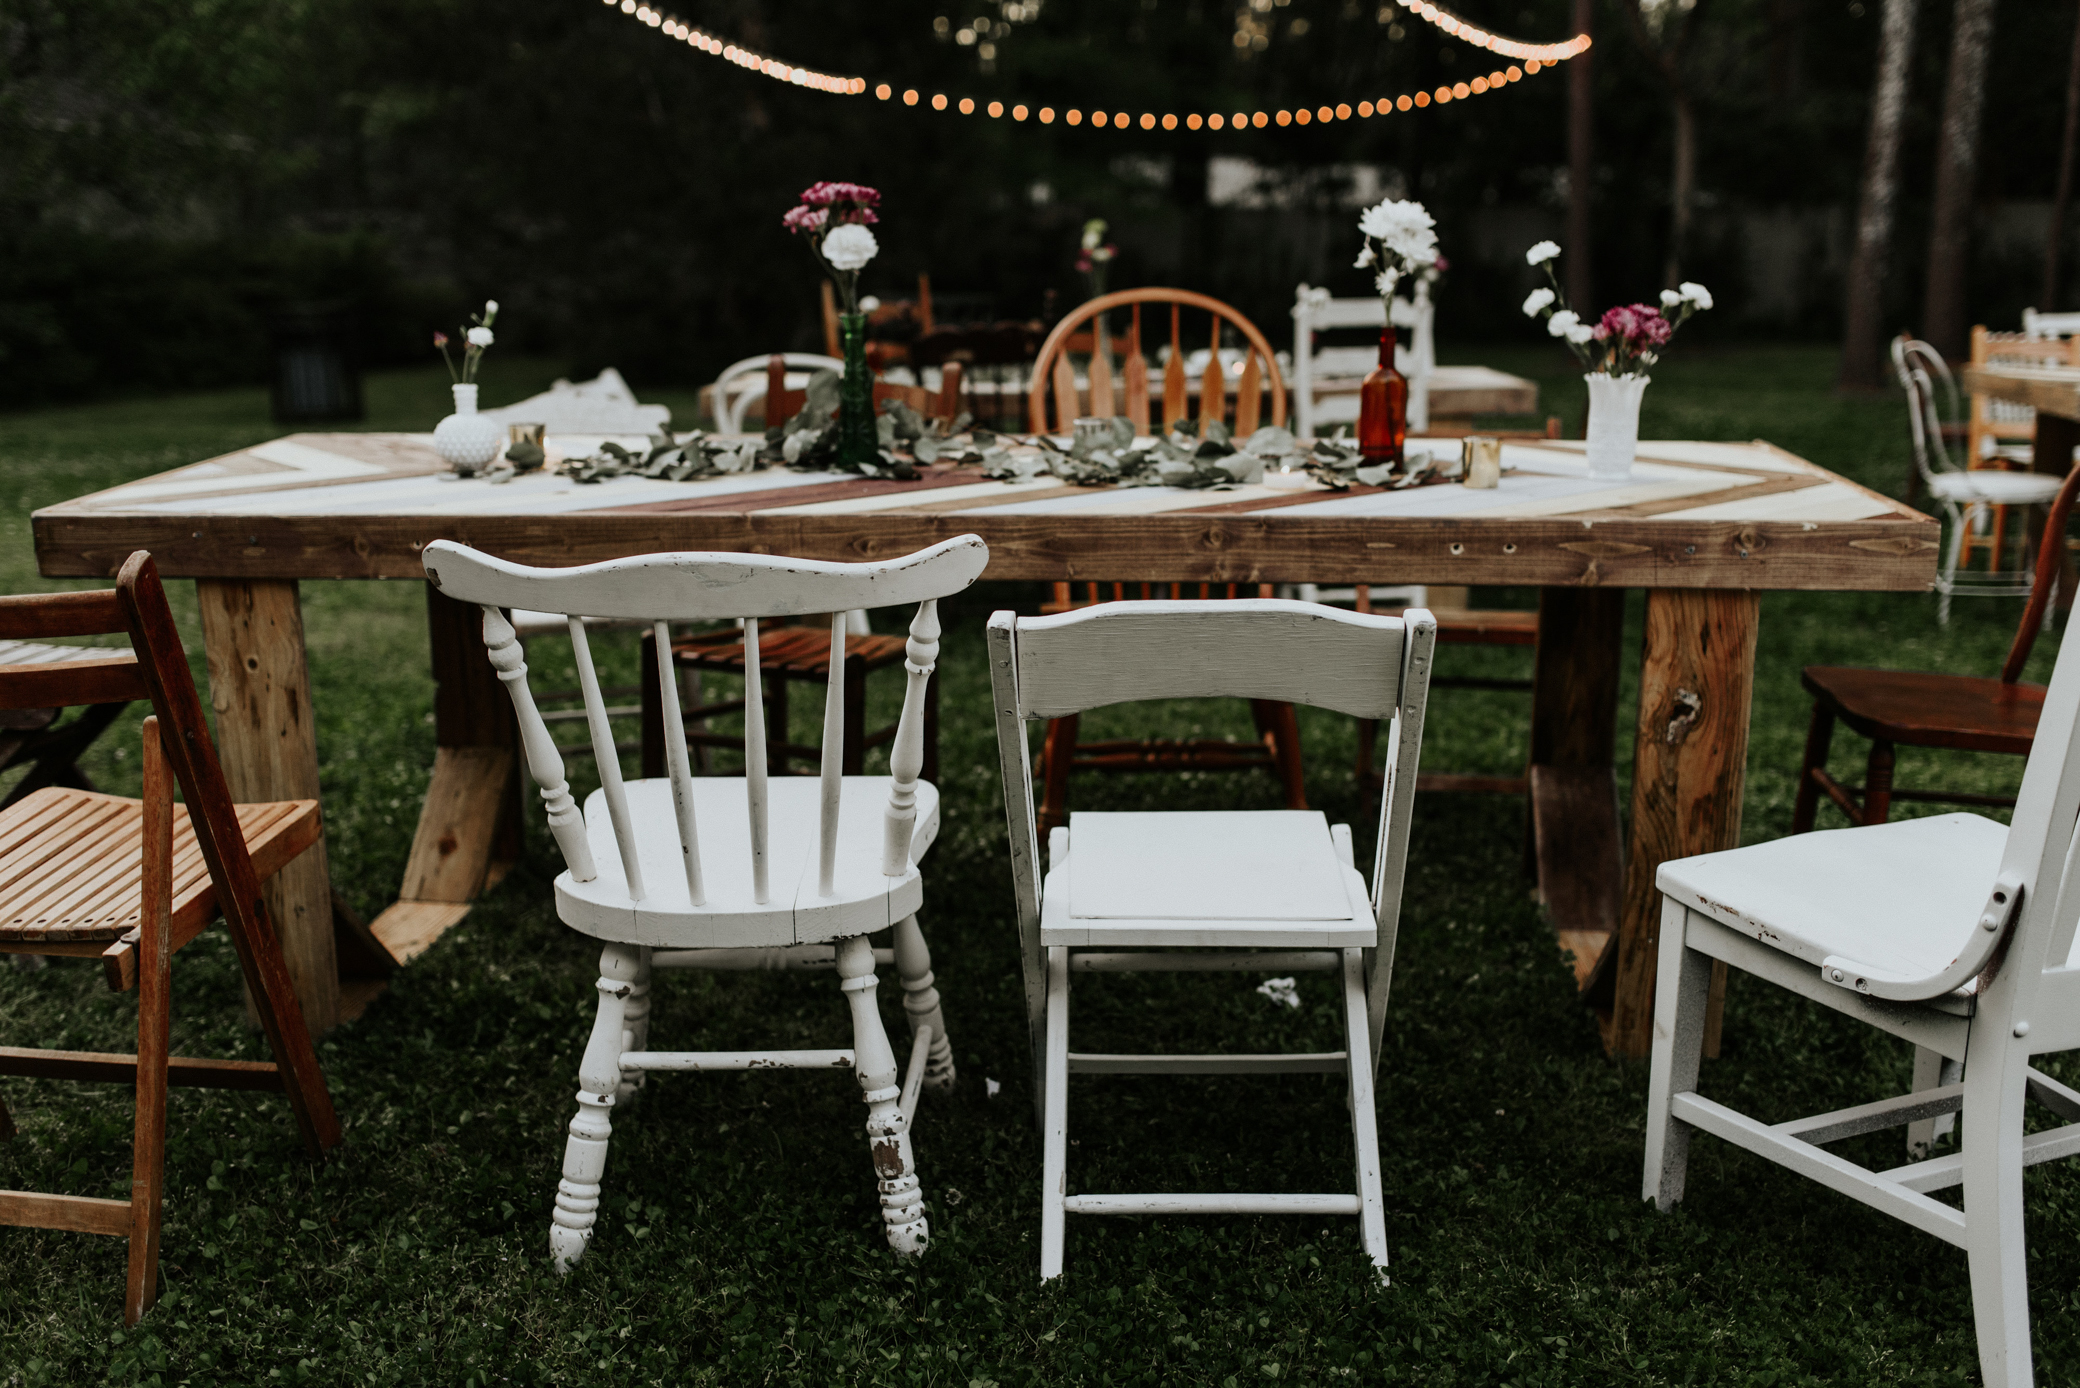 Eclectic Bohemian Wedding Reception at The Cedars